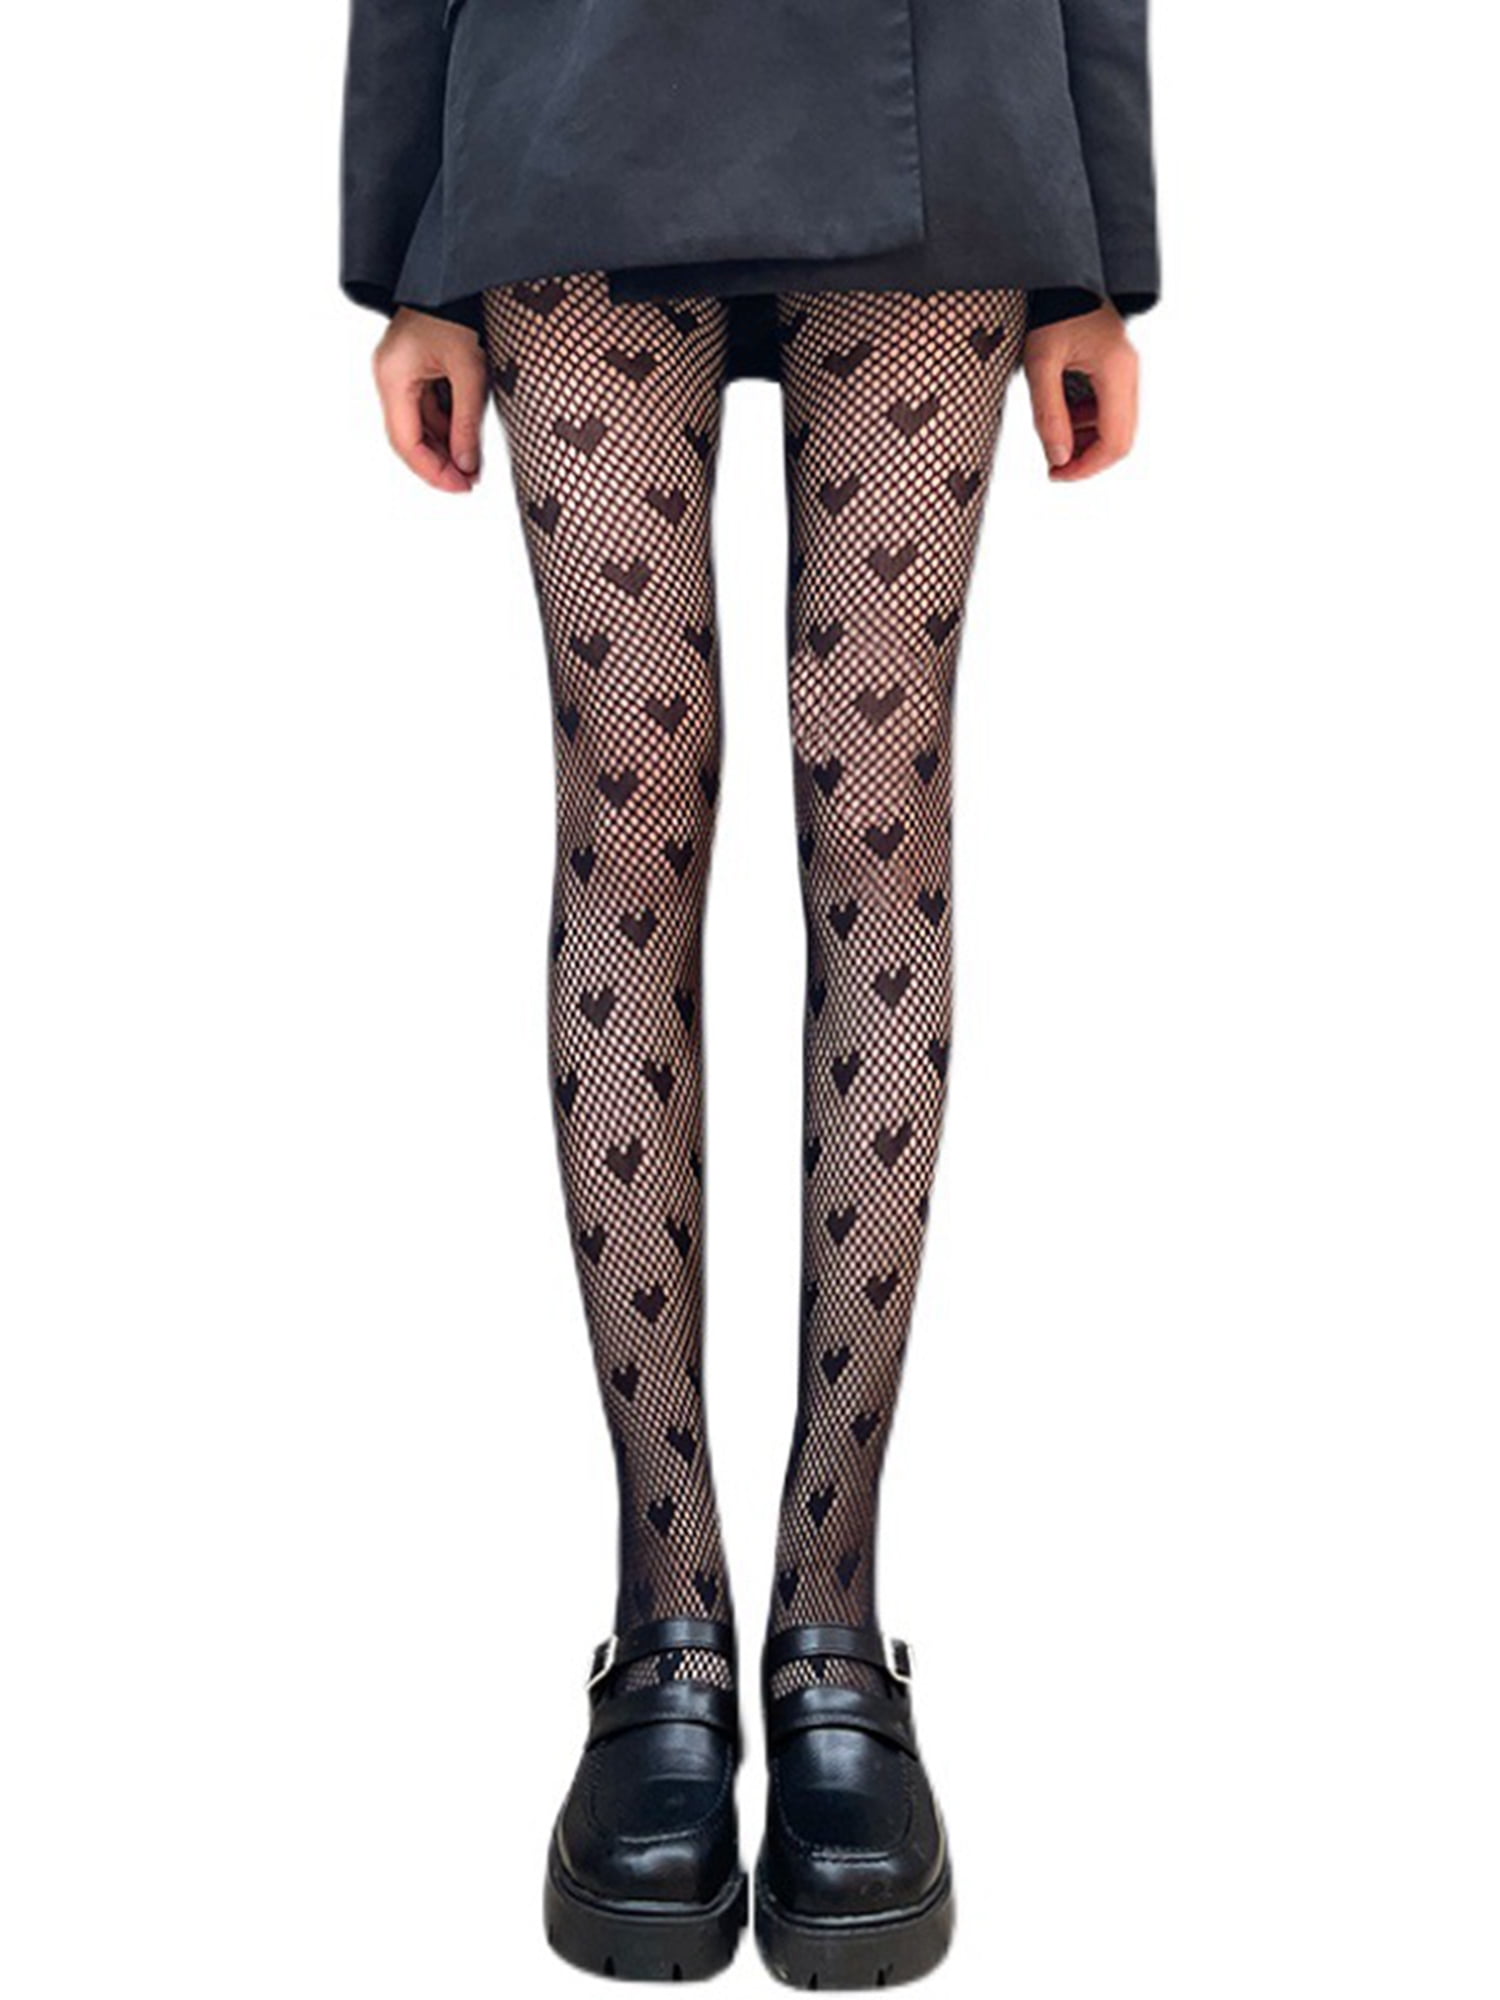 HGYCPP Women Sexy Lace Pantyhose Sweet Love Heart Pattern Jacquard Tights  Gothic Punk Lolita Hollow Out Fishnet Mesh Stockings 